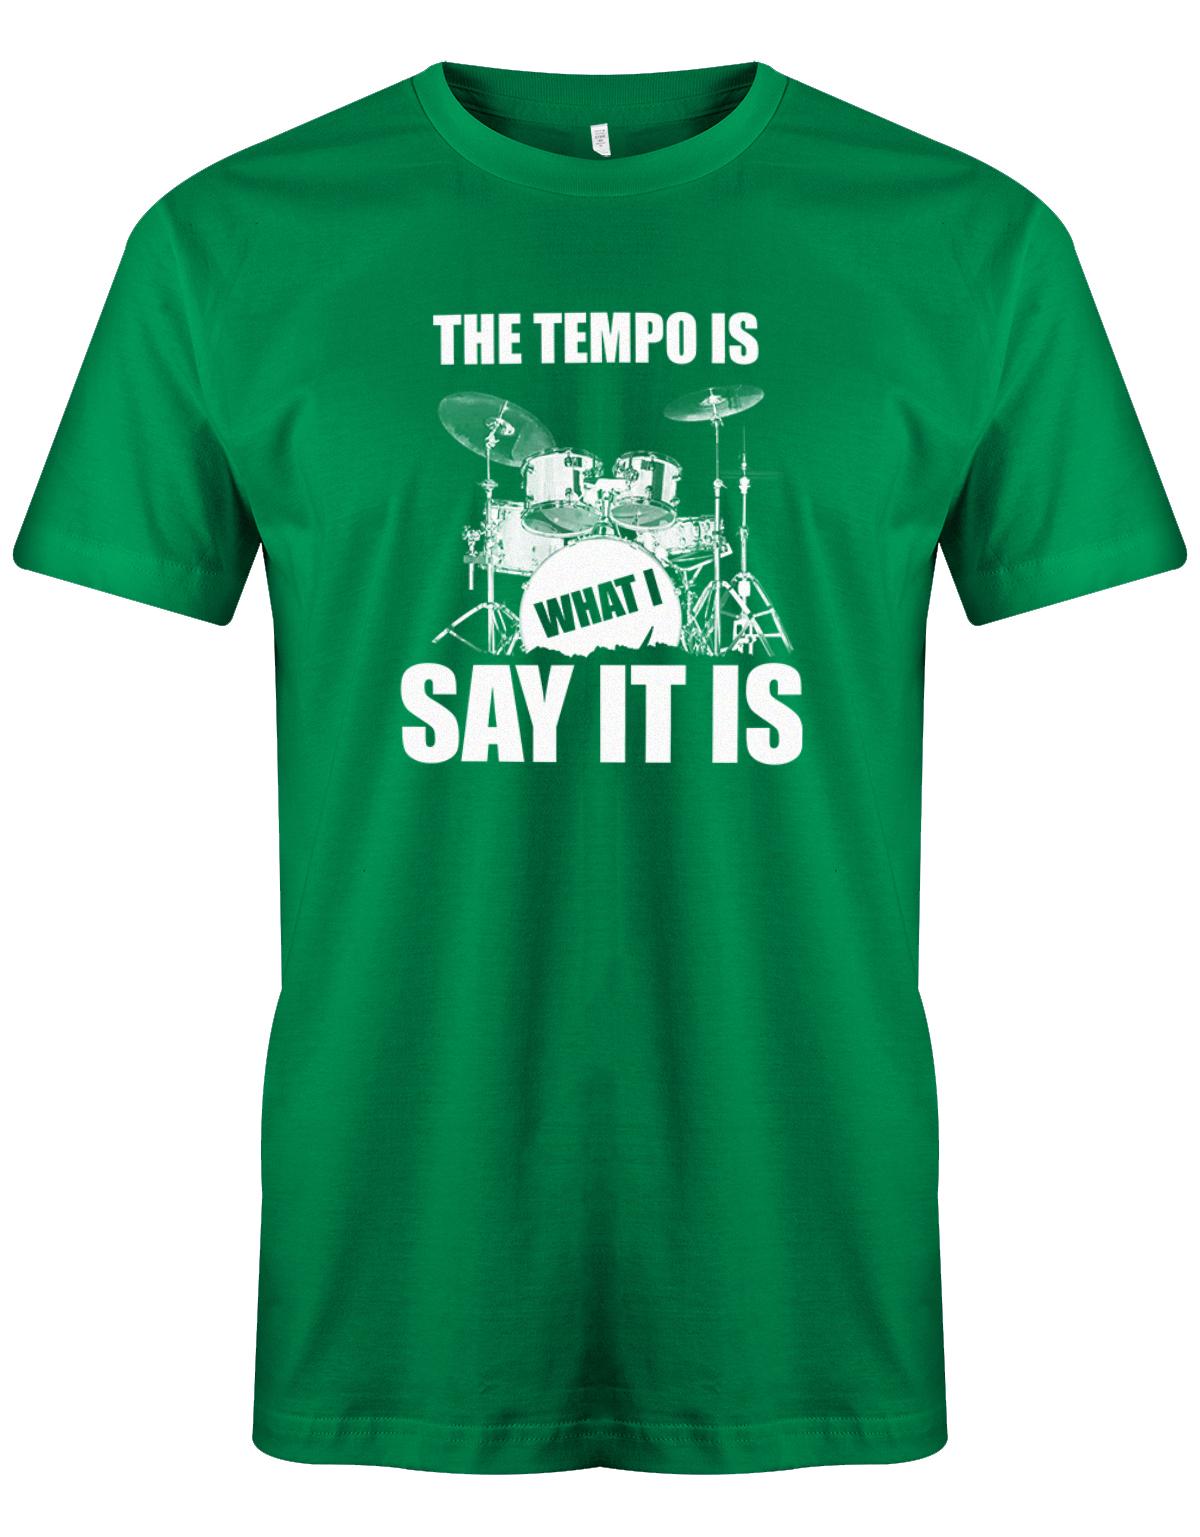 The-Tempo-is-what-i-say-it-is-SChlagzeuger-Drummer-Shirt-Gr-n